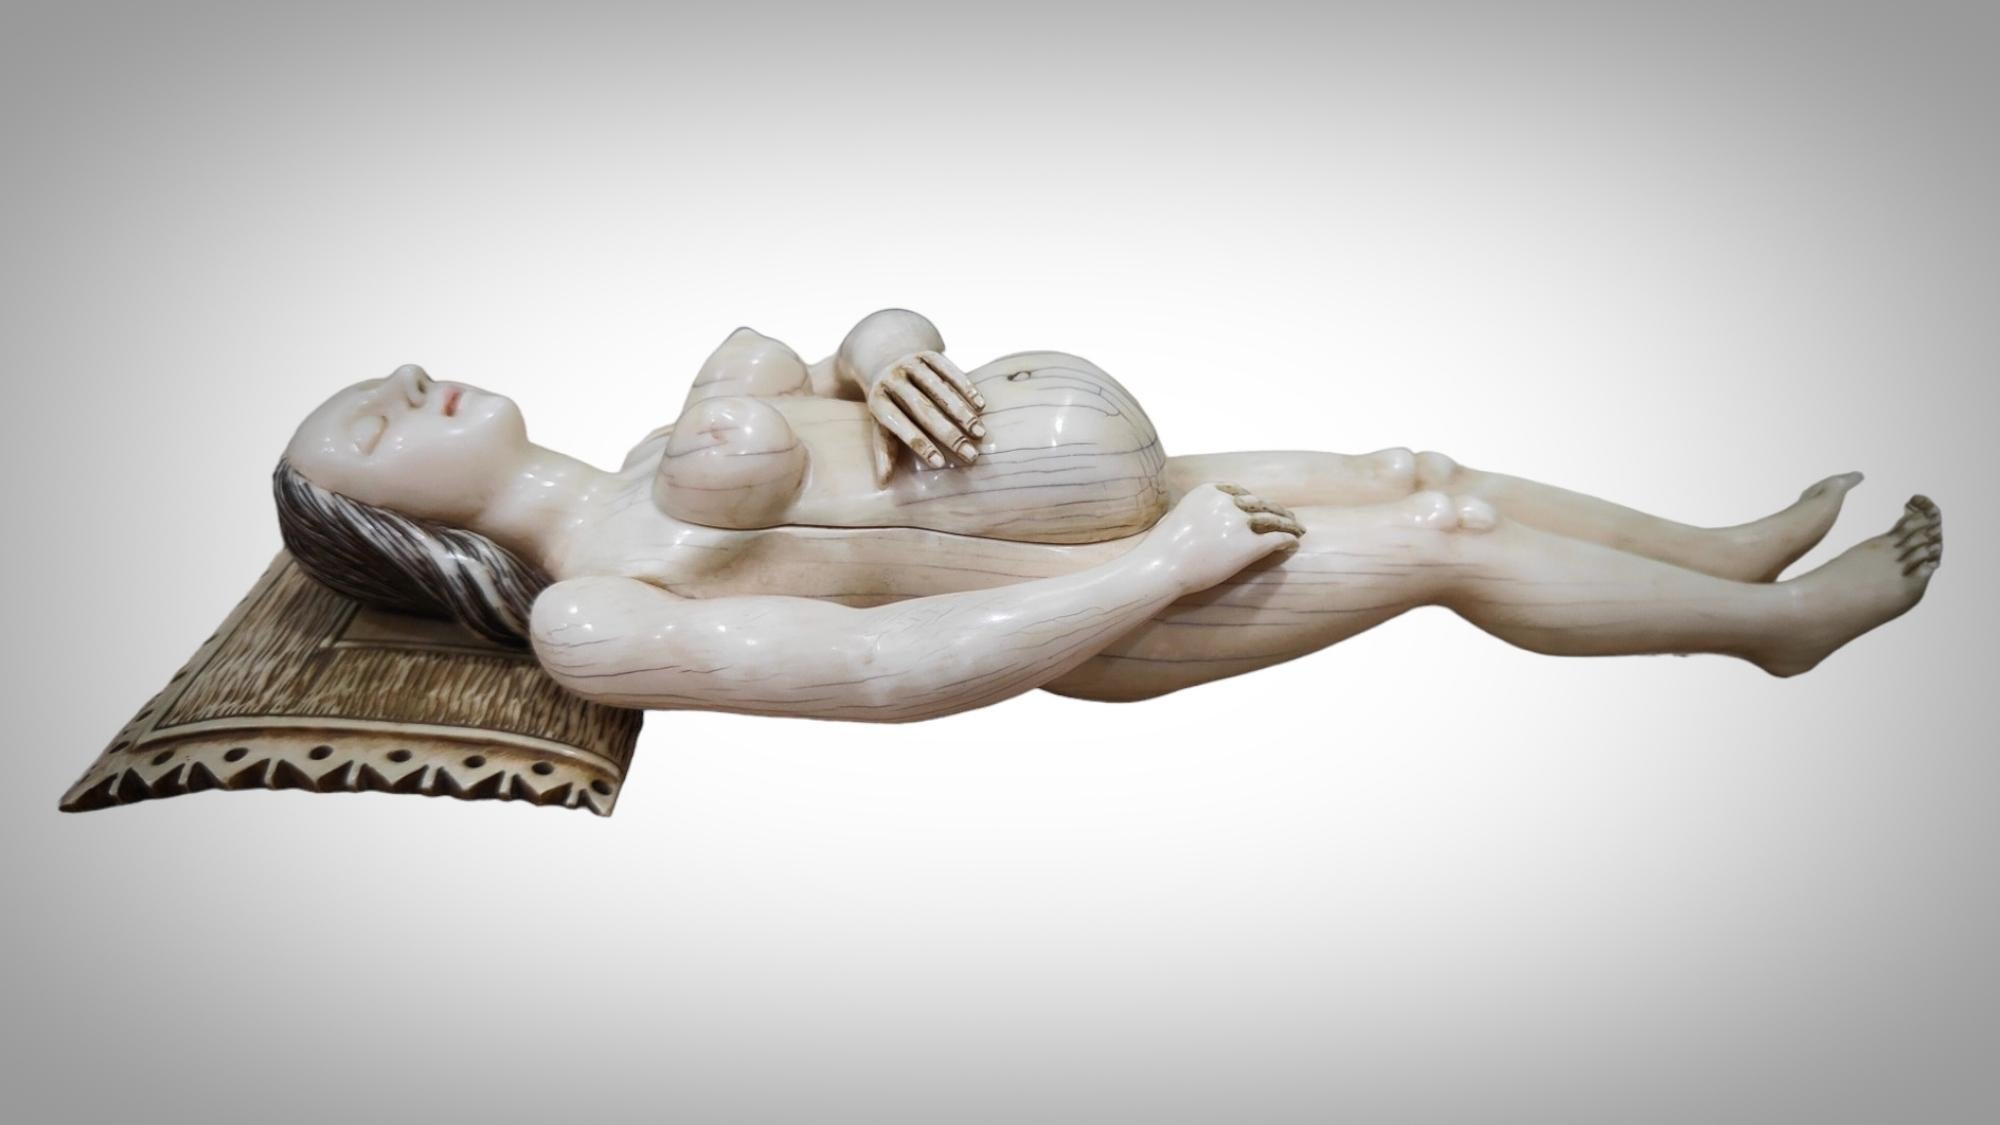 A GERMAN  ANATOMICAL MODEL OF A PREGNANT WOMAN STEPHEN ZICK
The woman with articulated arms, removable torso revealing internal organs, lying on a couch with cushion incised and modelled with simulated lace.On a later wood box.
Stephen Zick was one